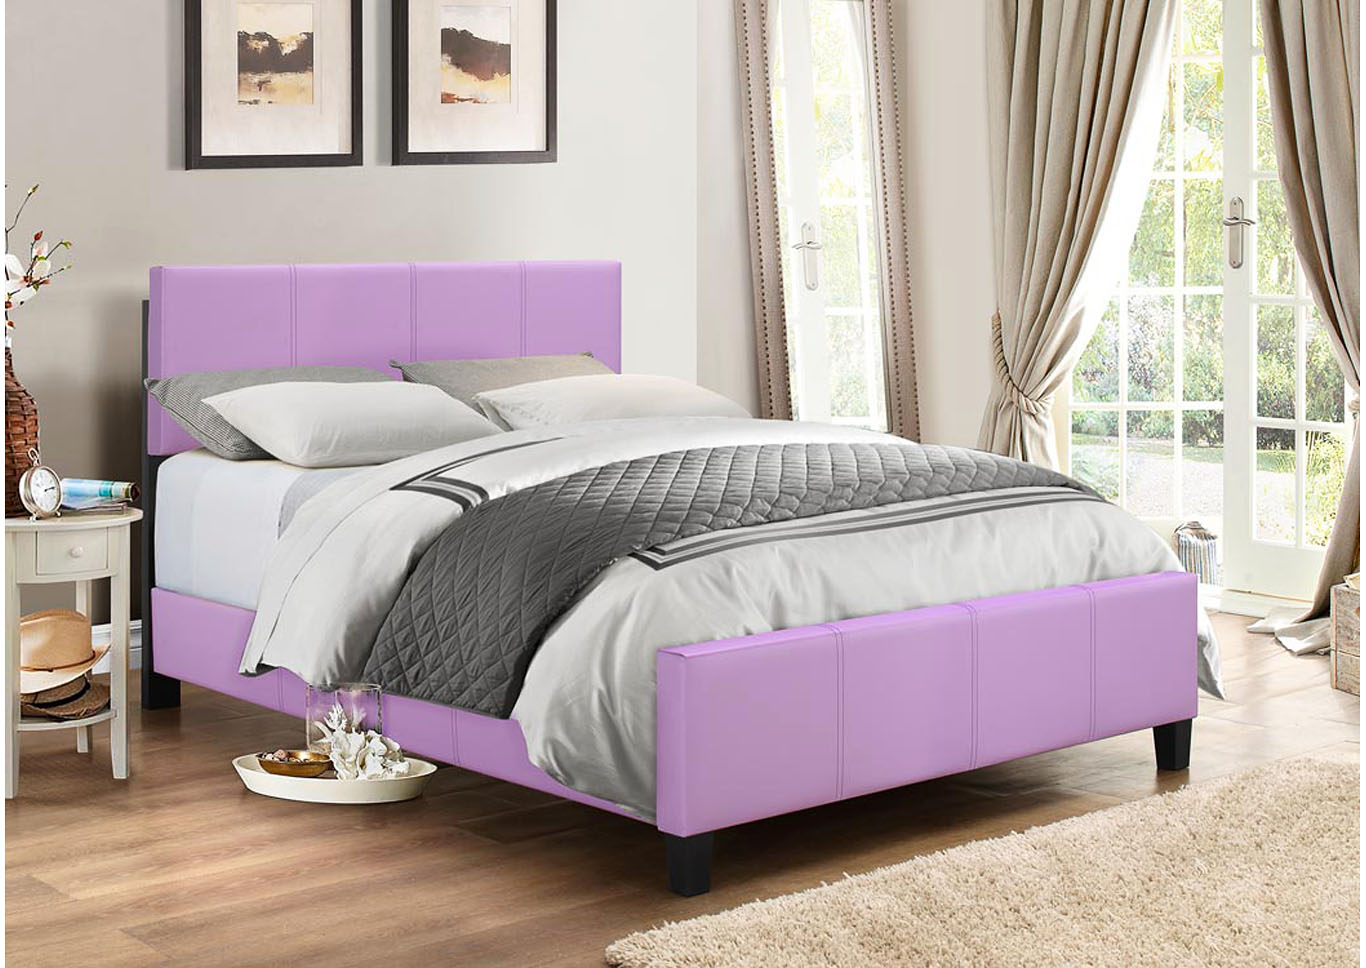 Zenfield Lilac Panel Queen Bed,Global Trading